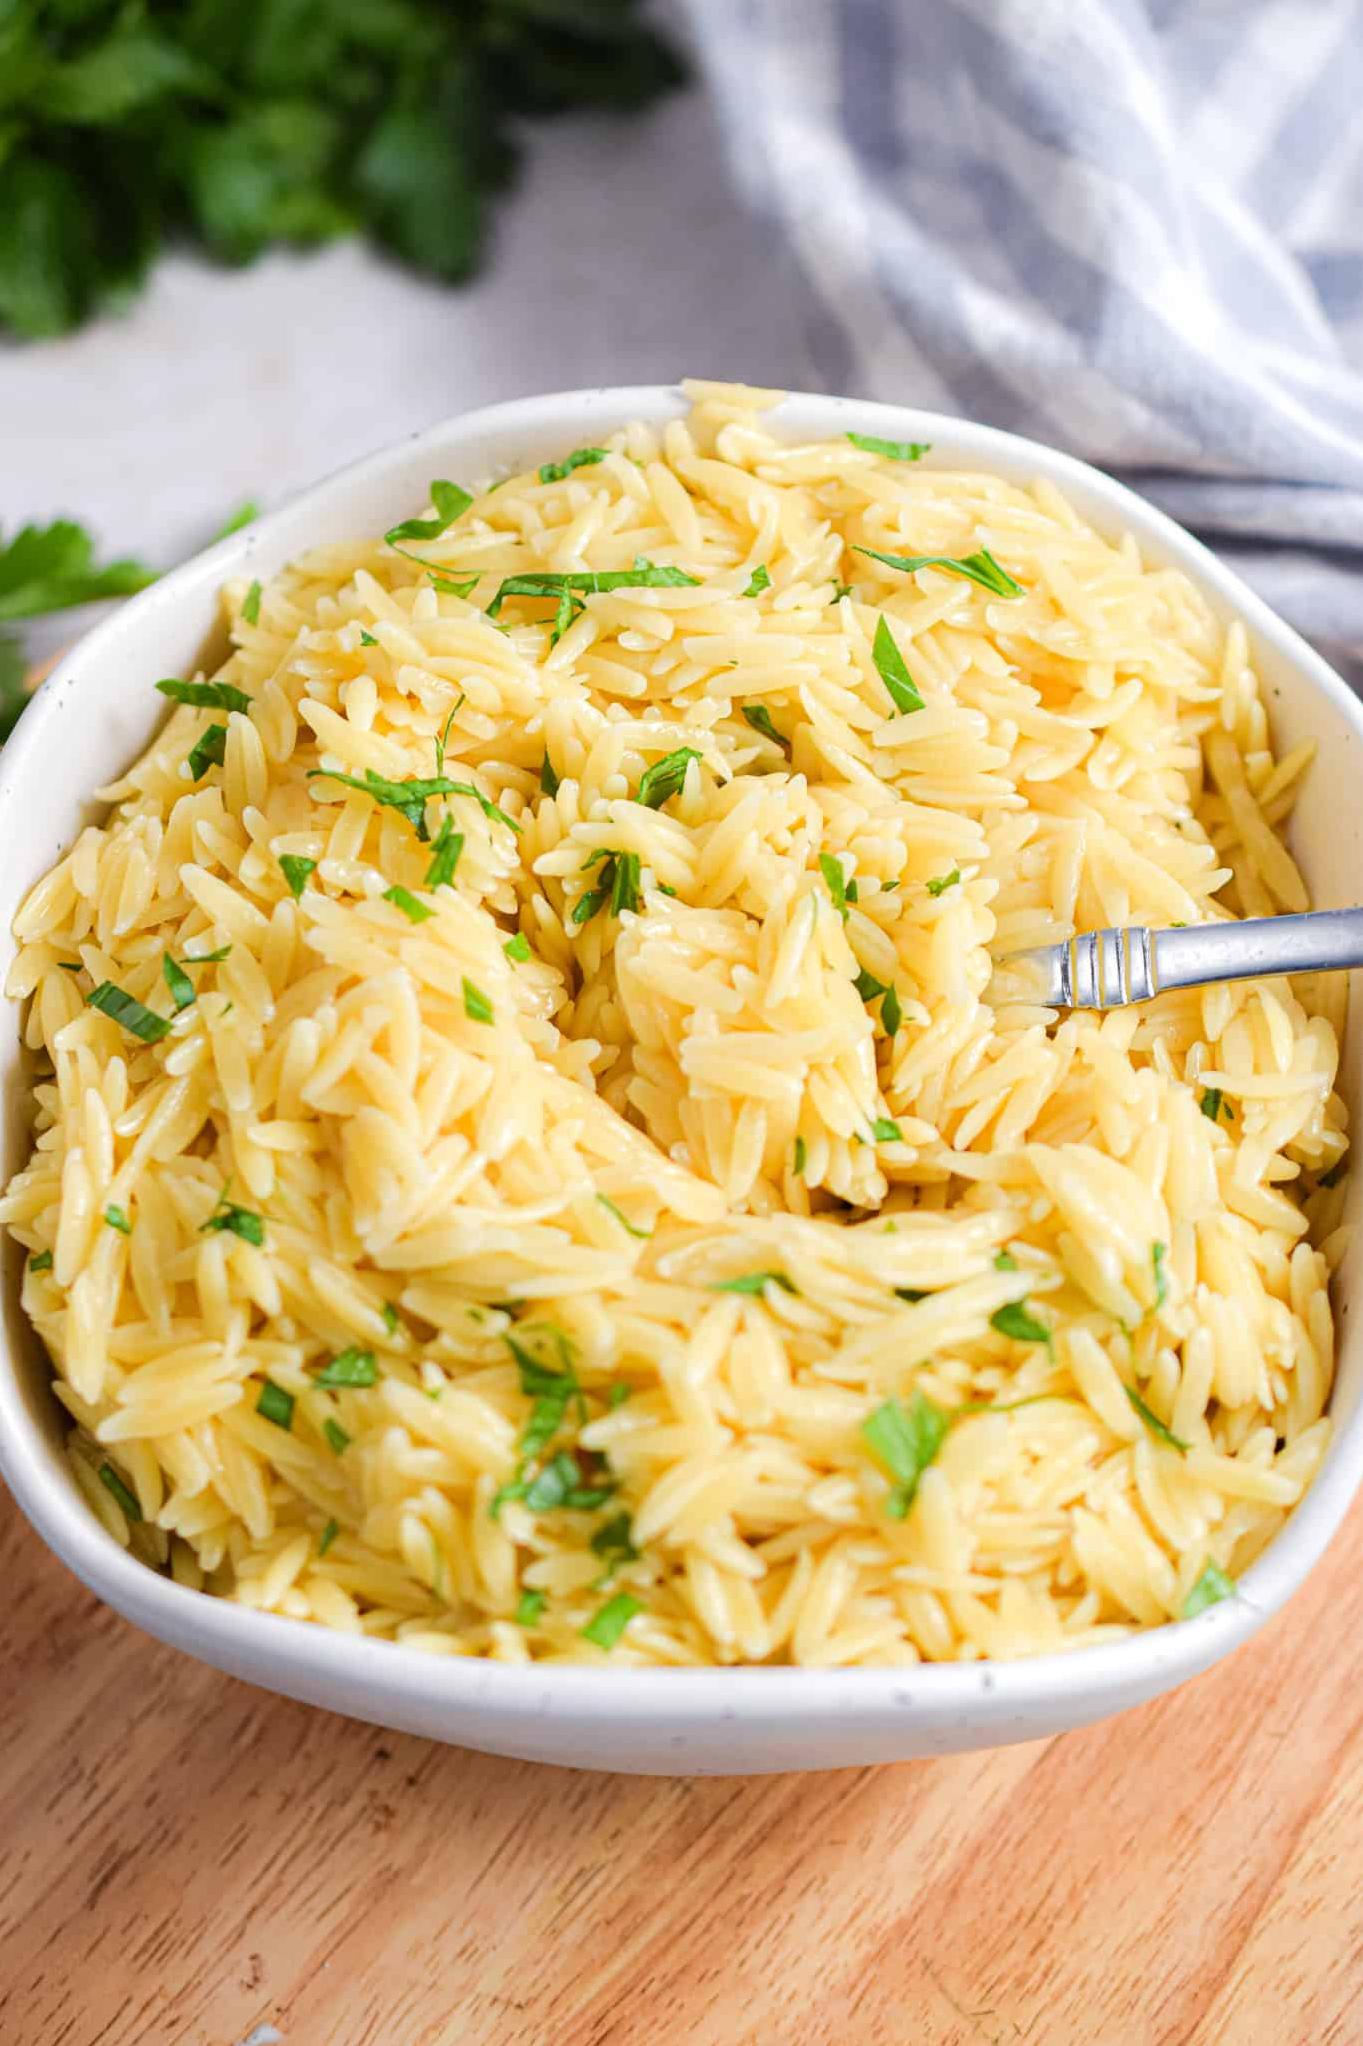  Get ready for a creamy, cheesy and comforting recipe!